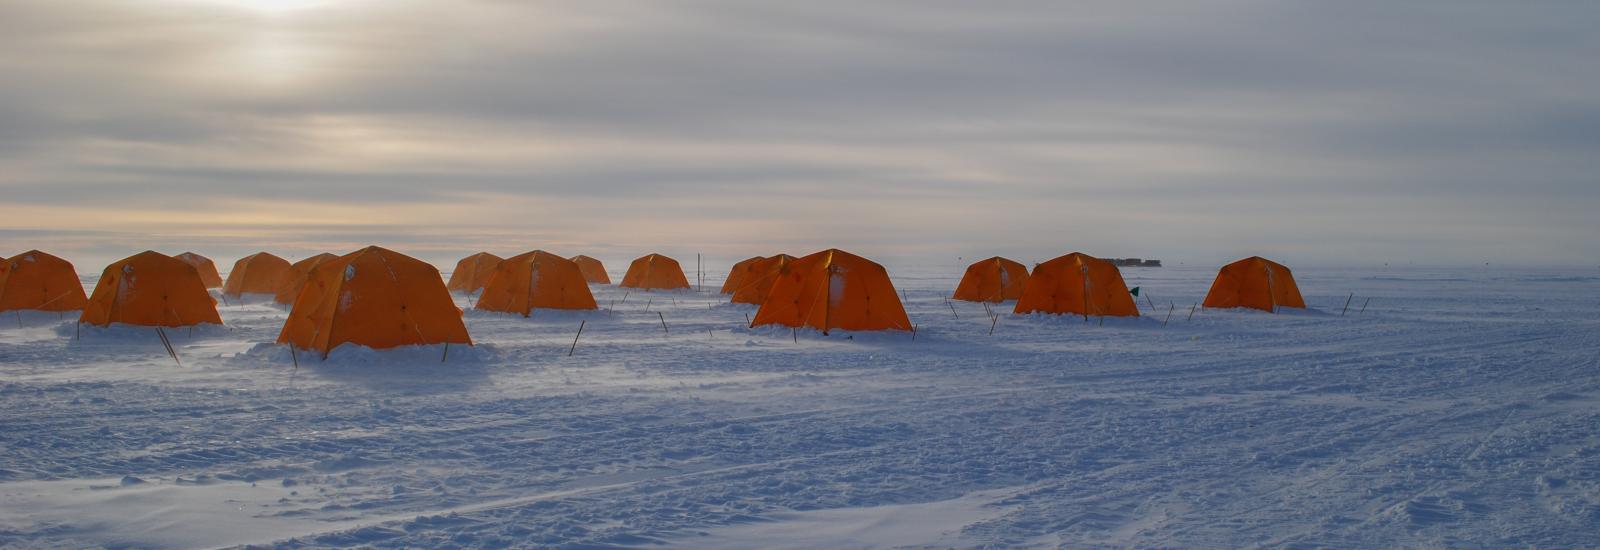 Snowy field with a group of orange tents under cloudy skies with halo of sun.